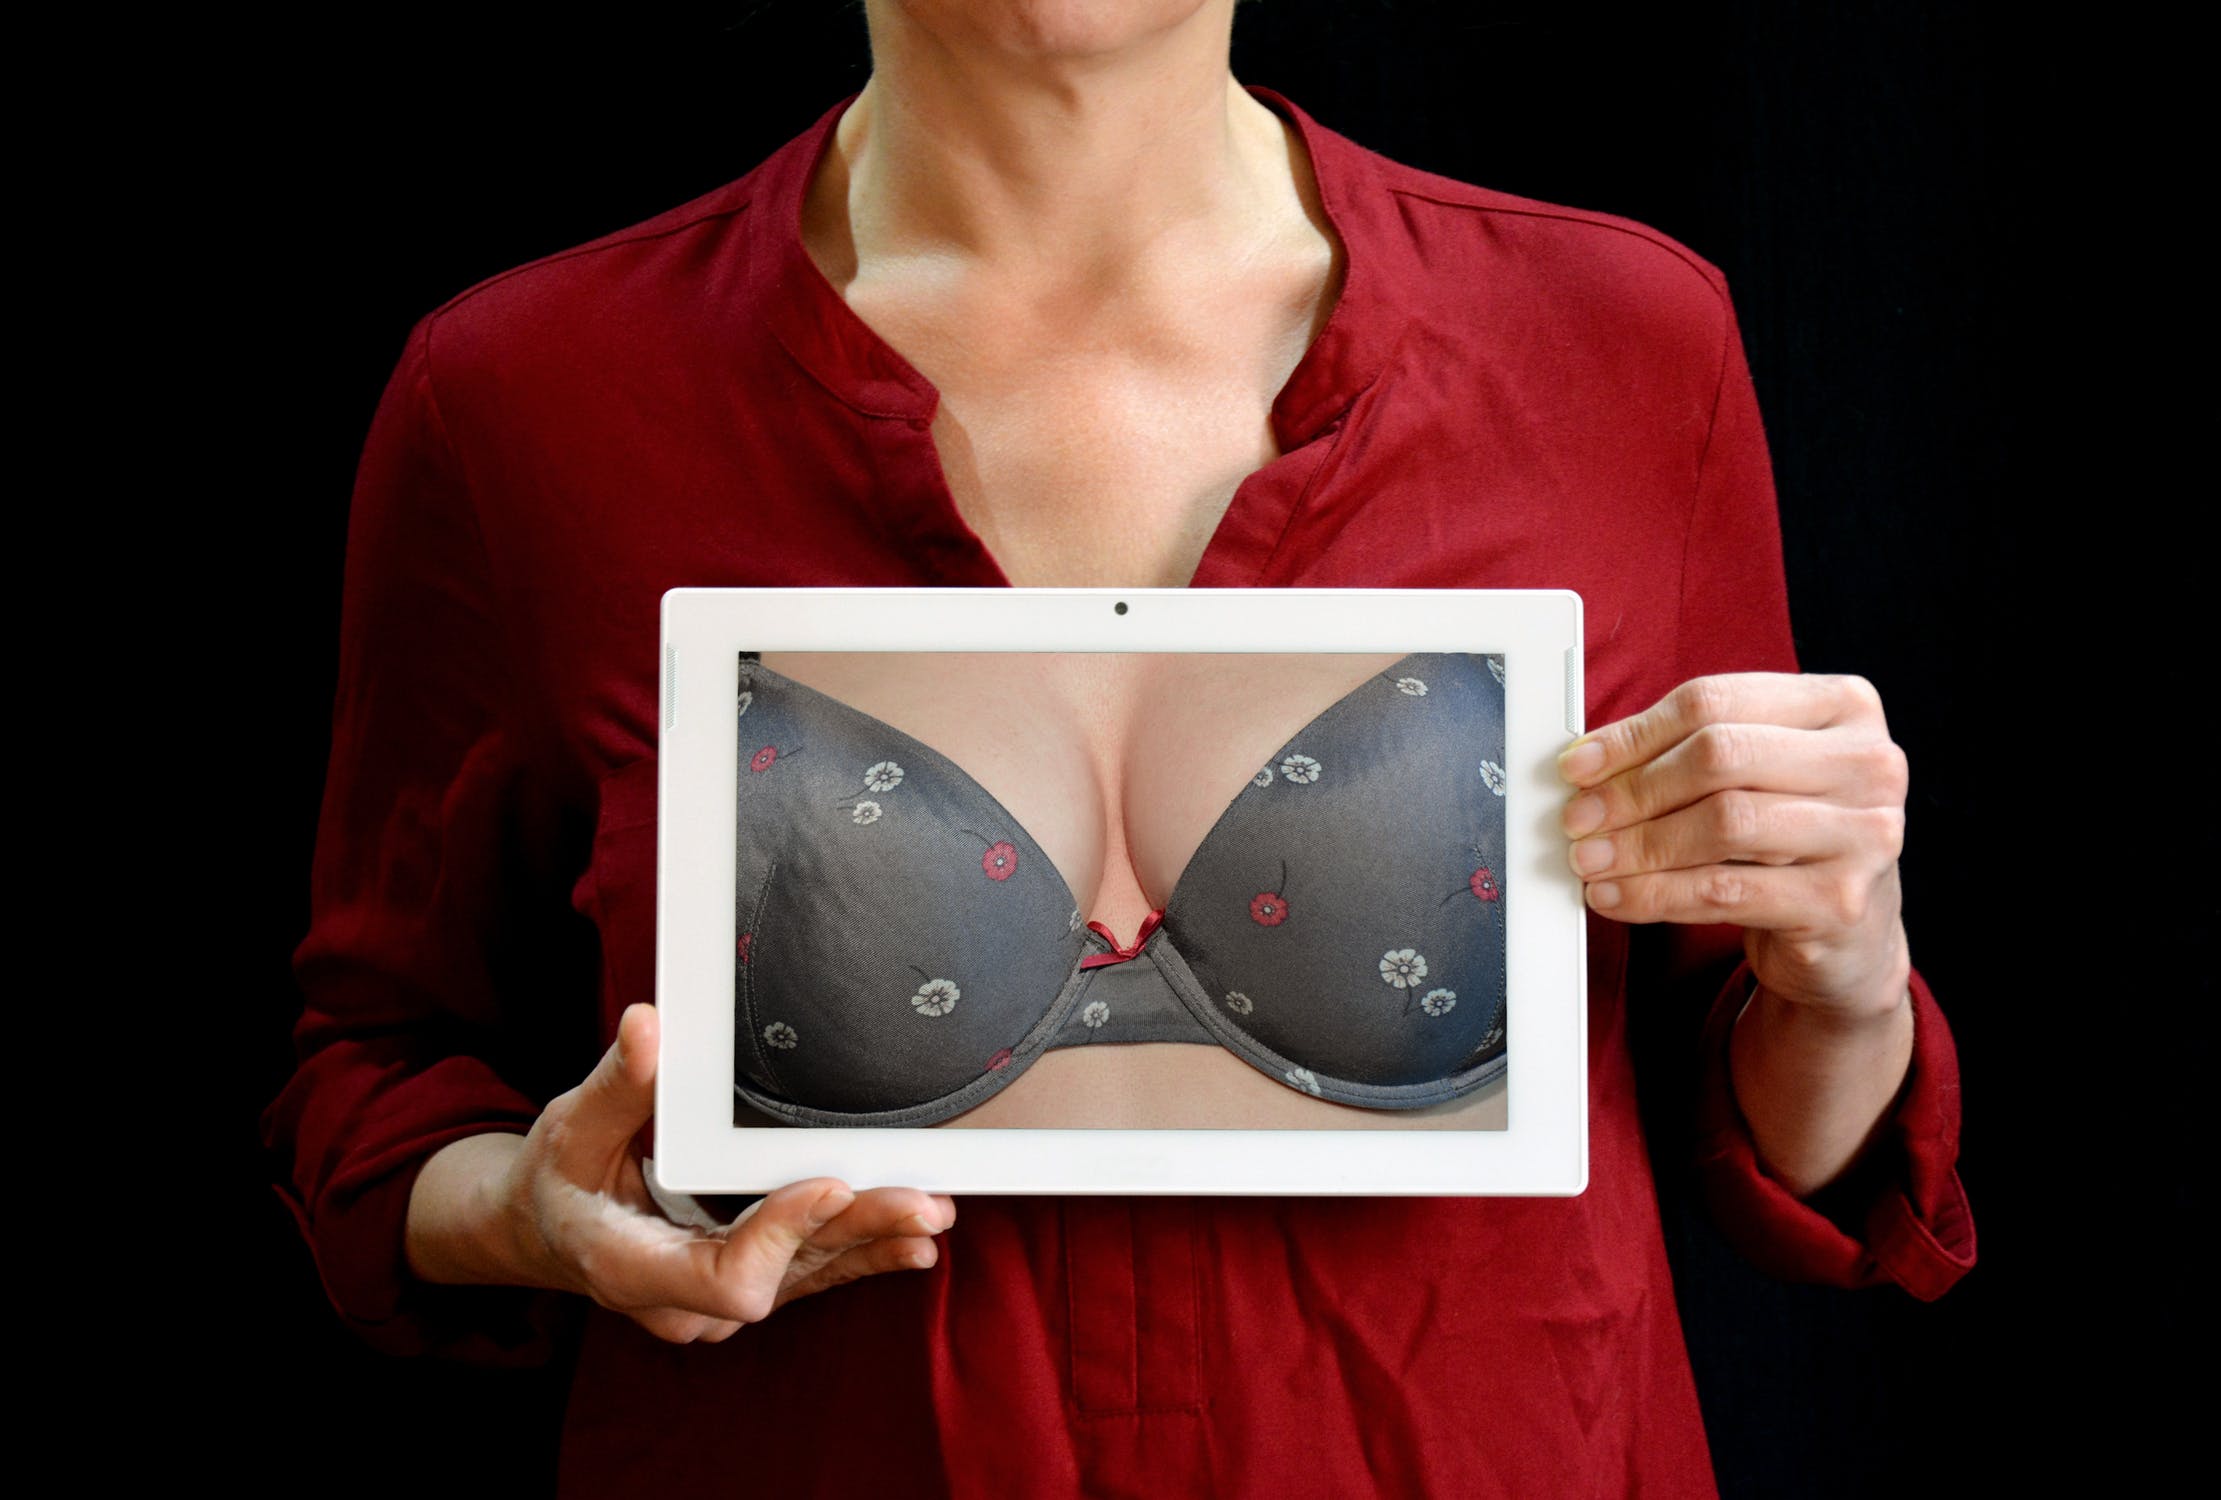 Common Questions to ask During a Breast Reduction Consultation